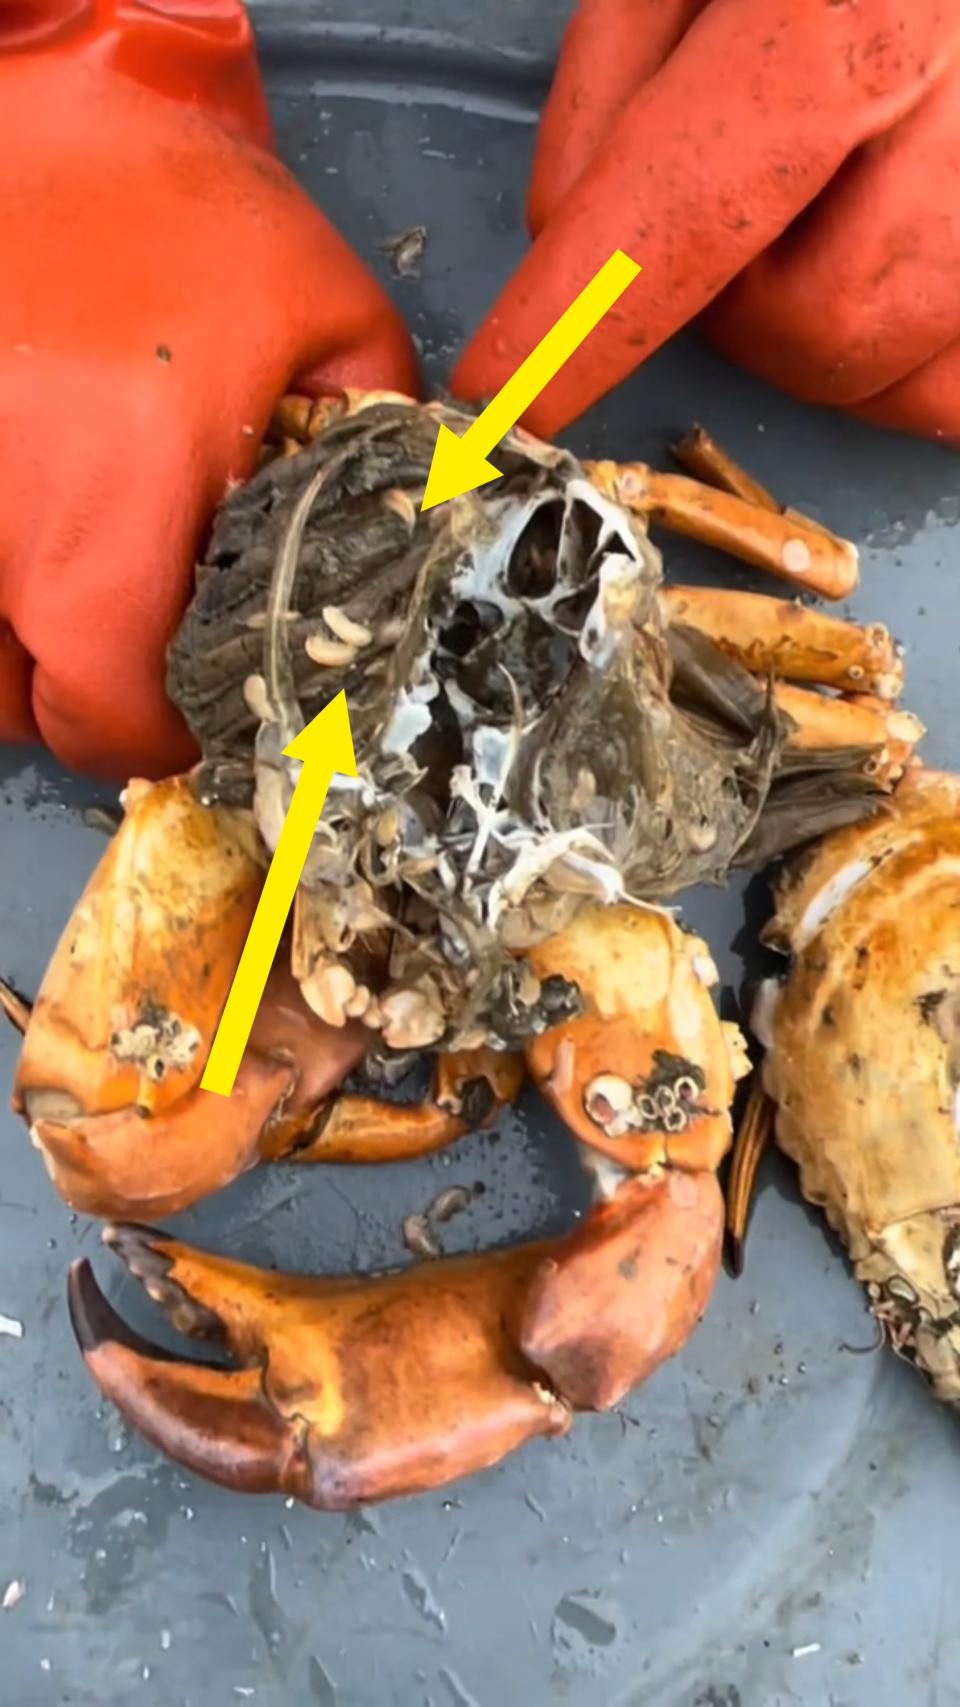 Gloved hands hold a crab with barnacles on its shell